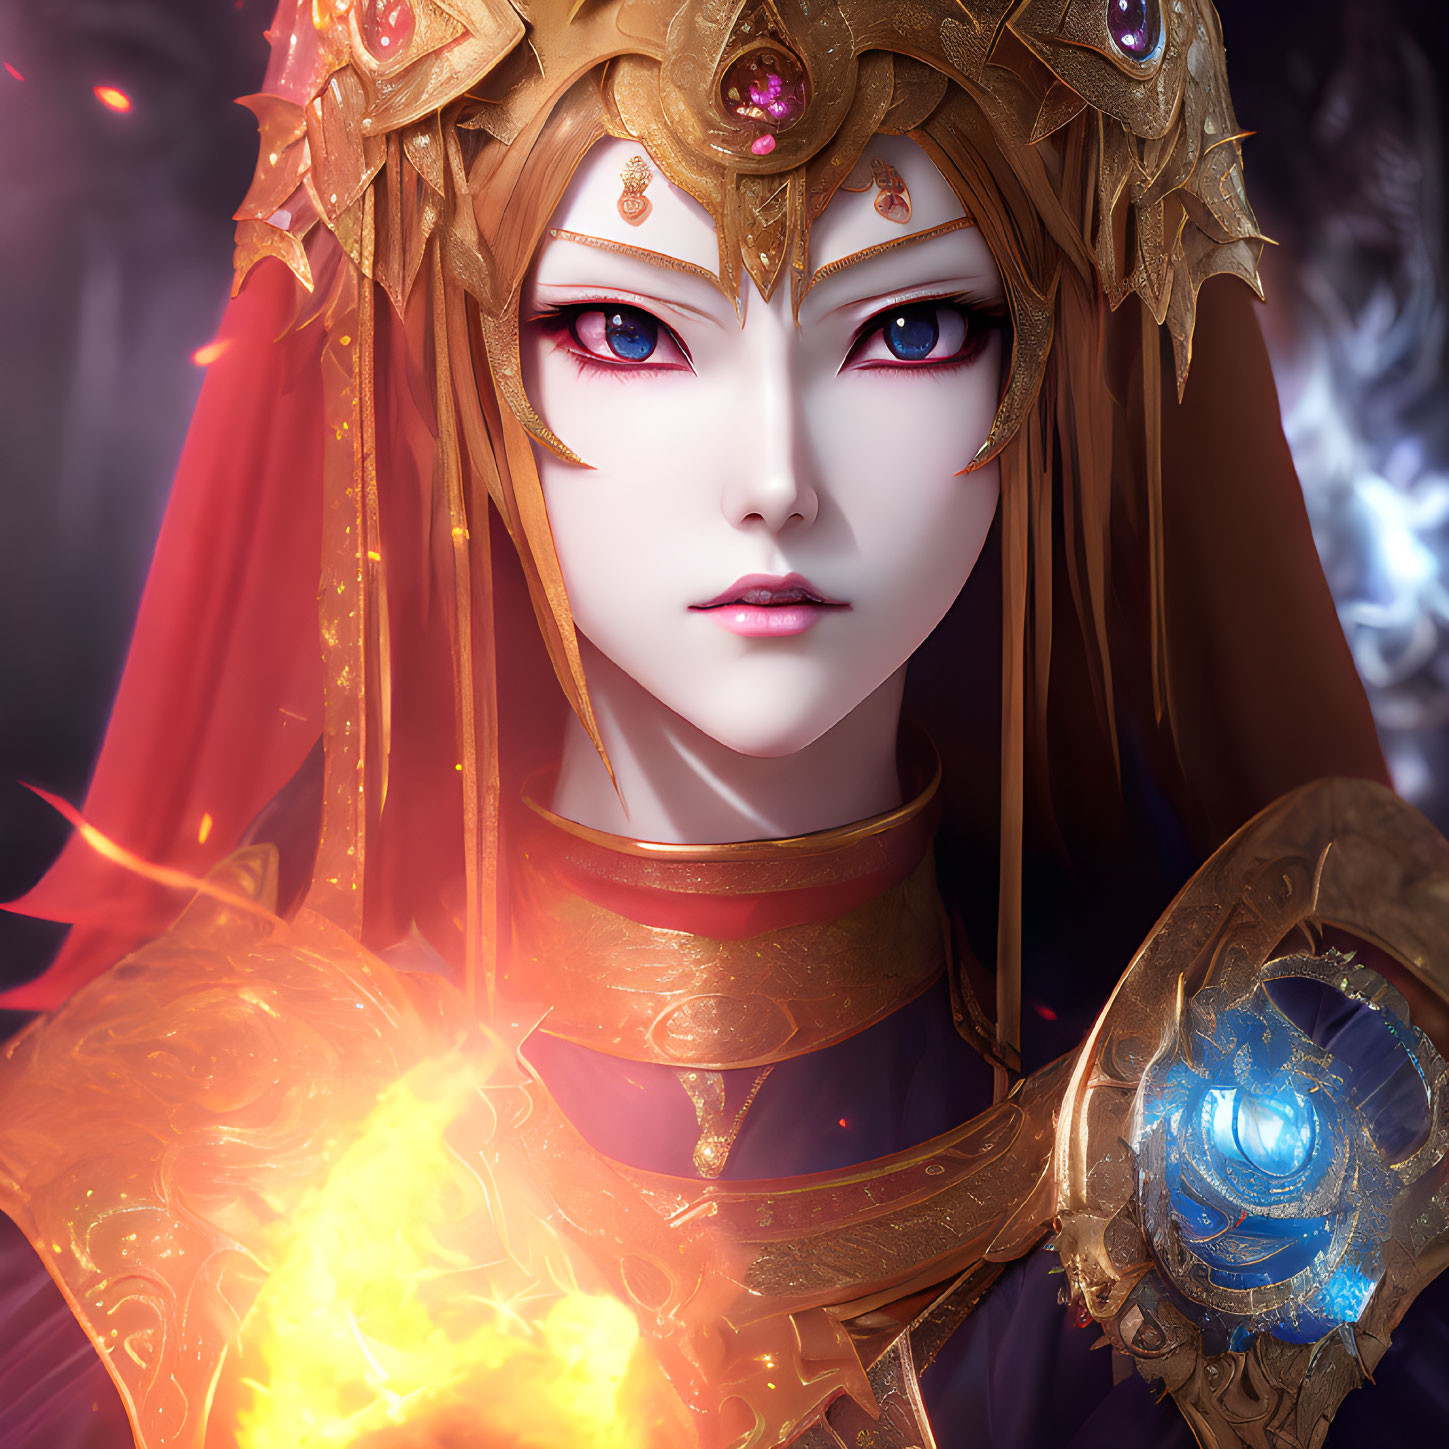 Regal female character in golden armor with fiery orb and purple eyes